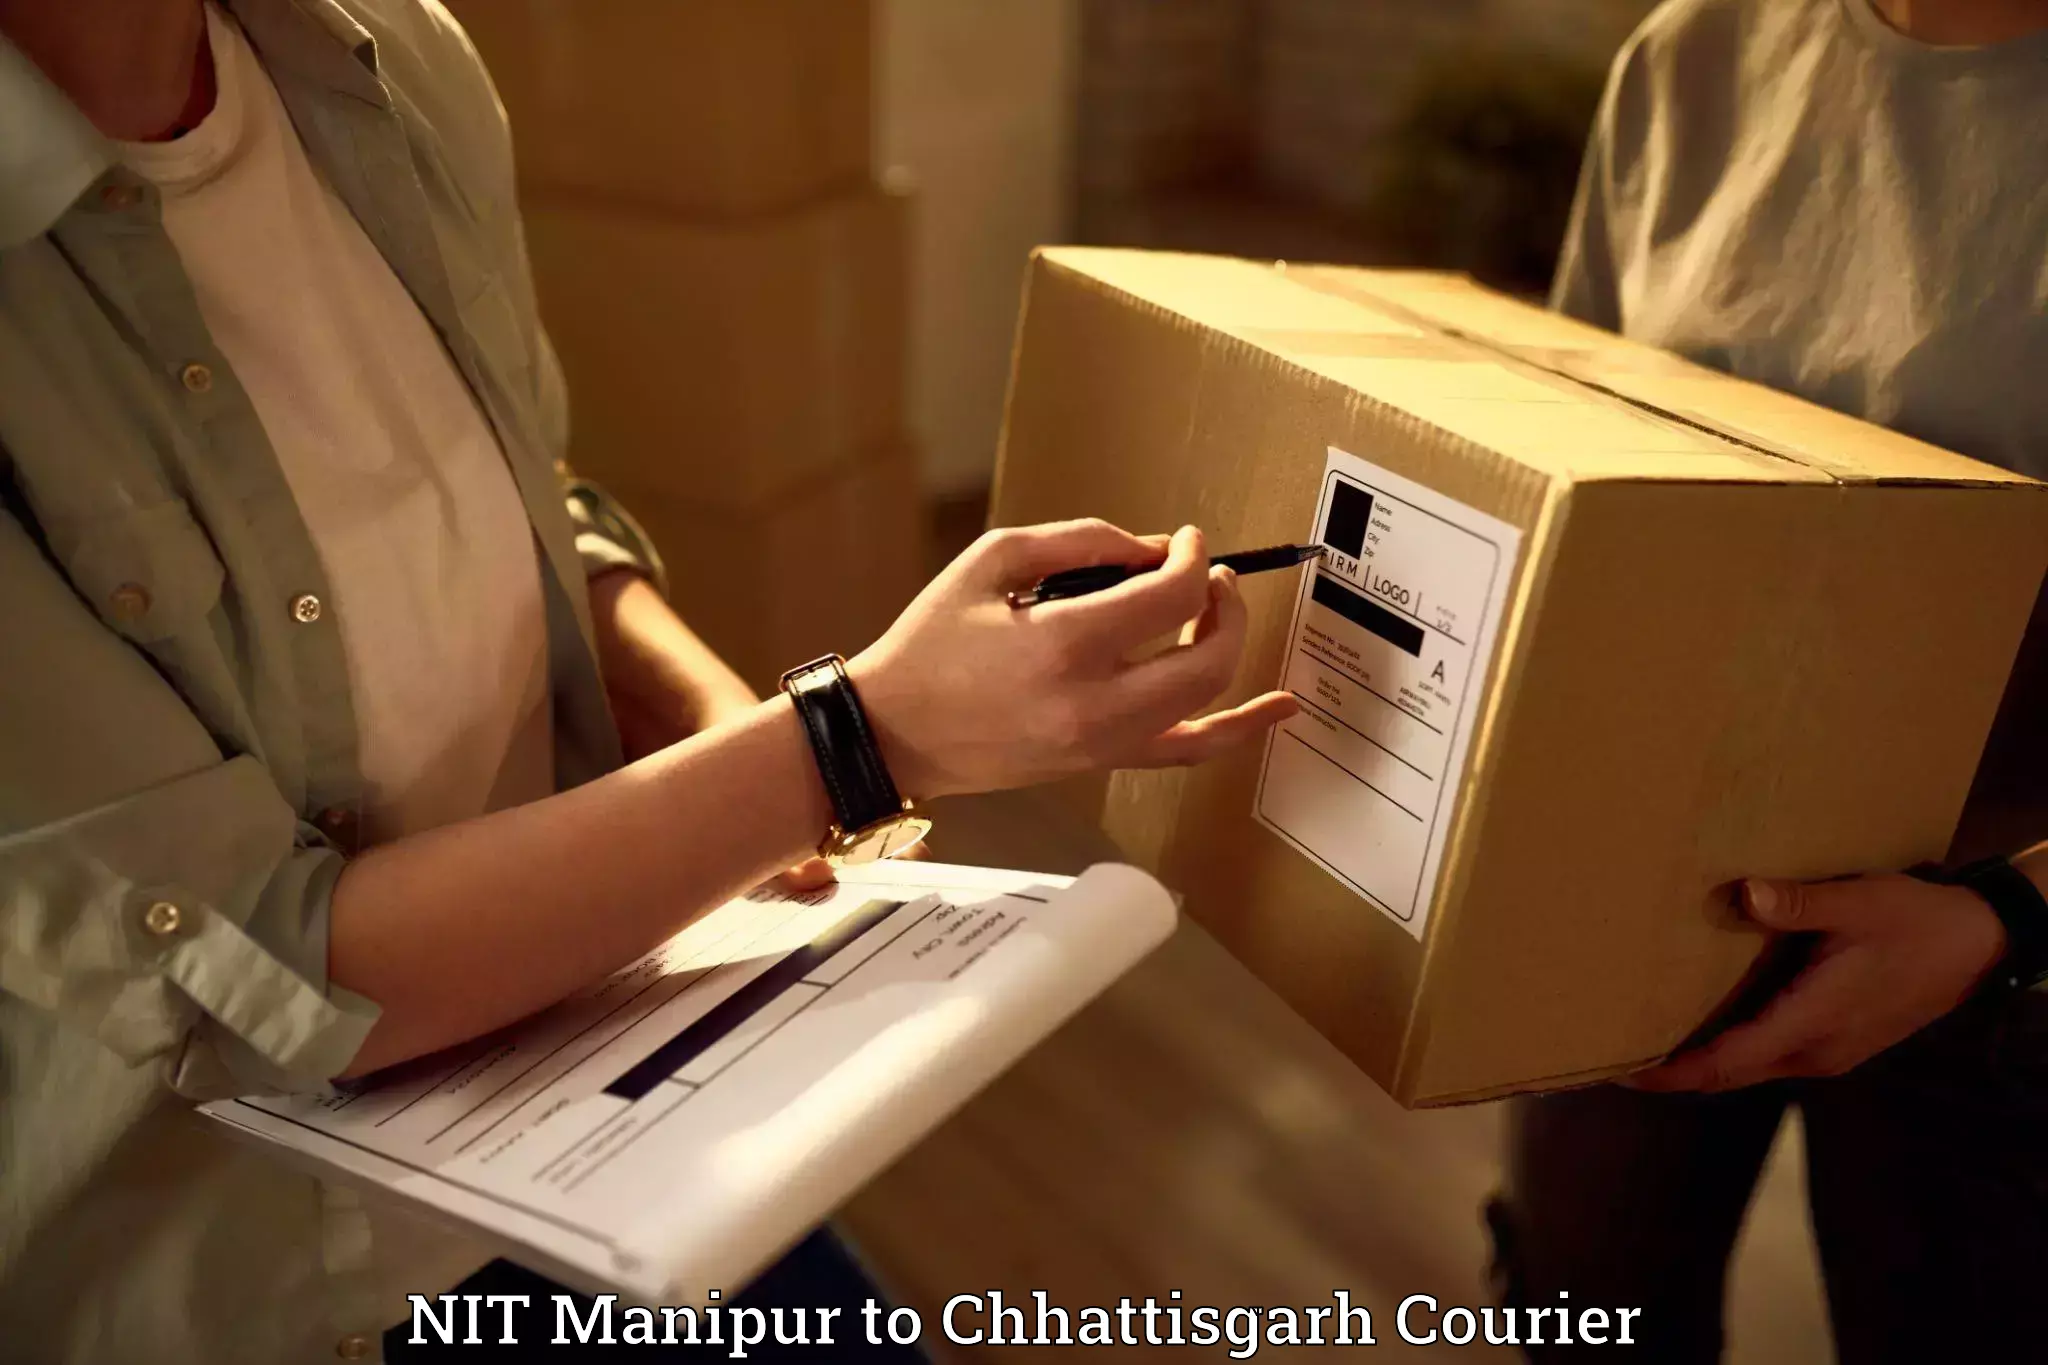 Trusted moving company NIT Manipur to Chhattisgarh